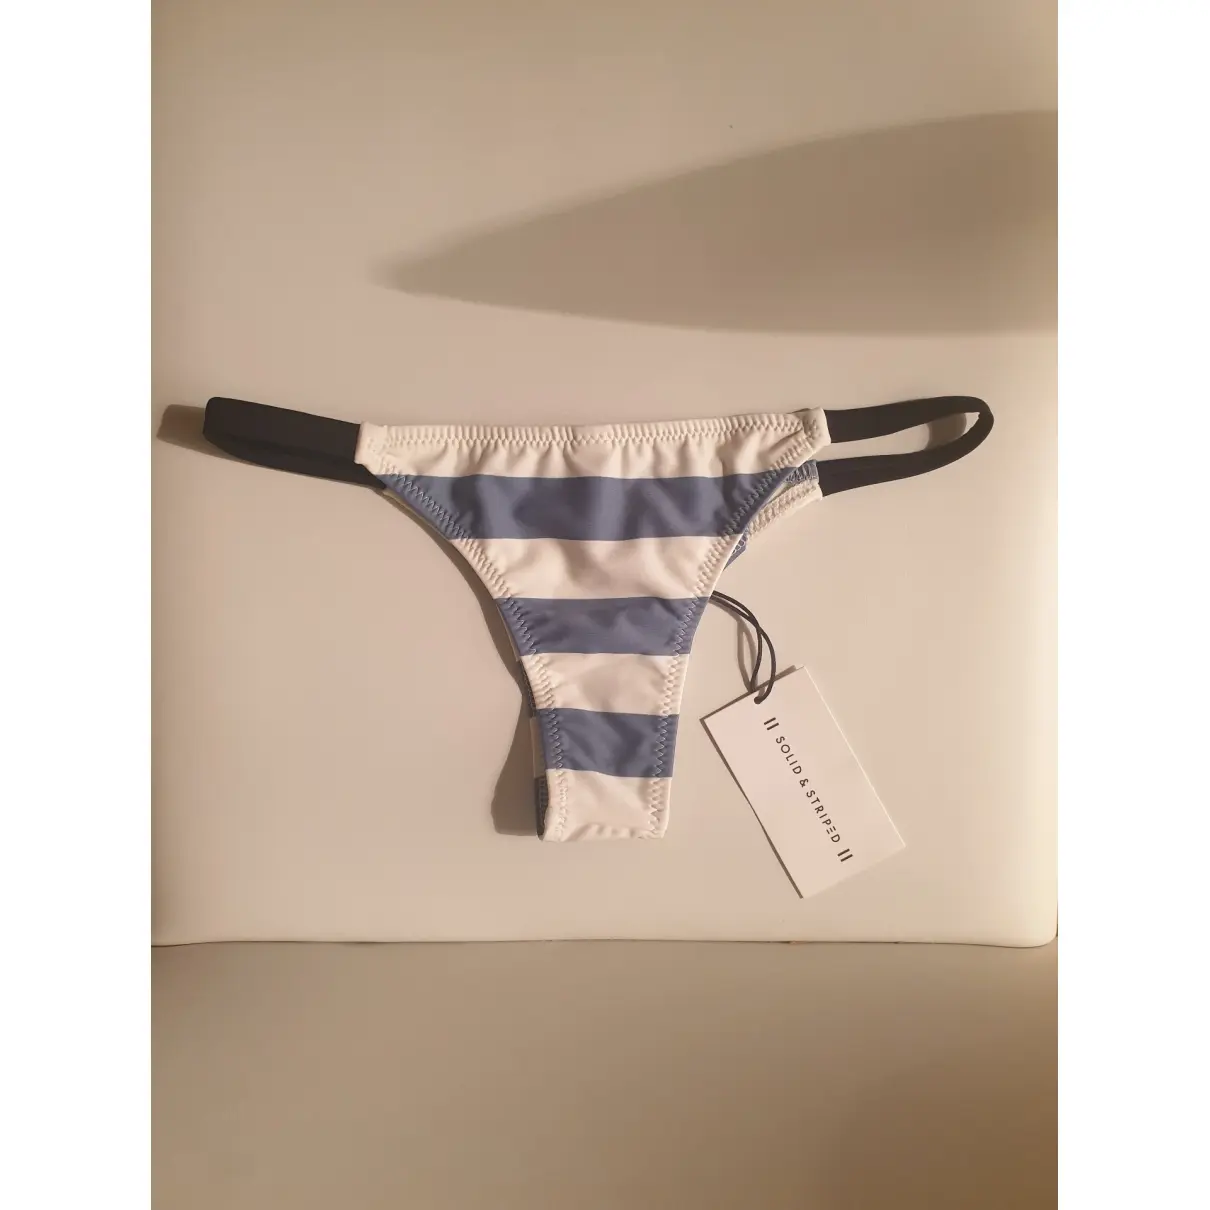 Buy Solid & Striped Two-piece swimsuit online